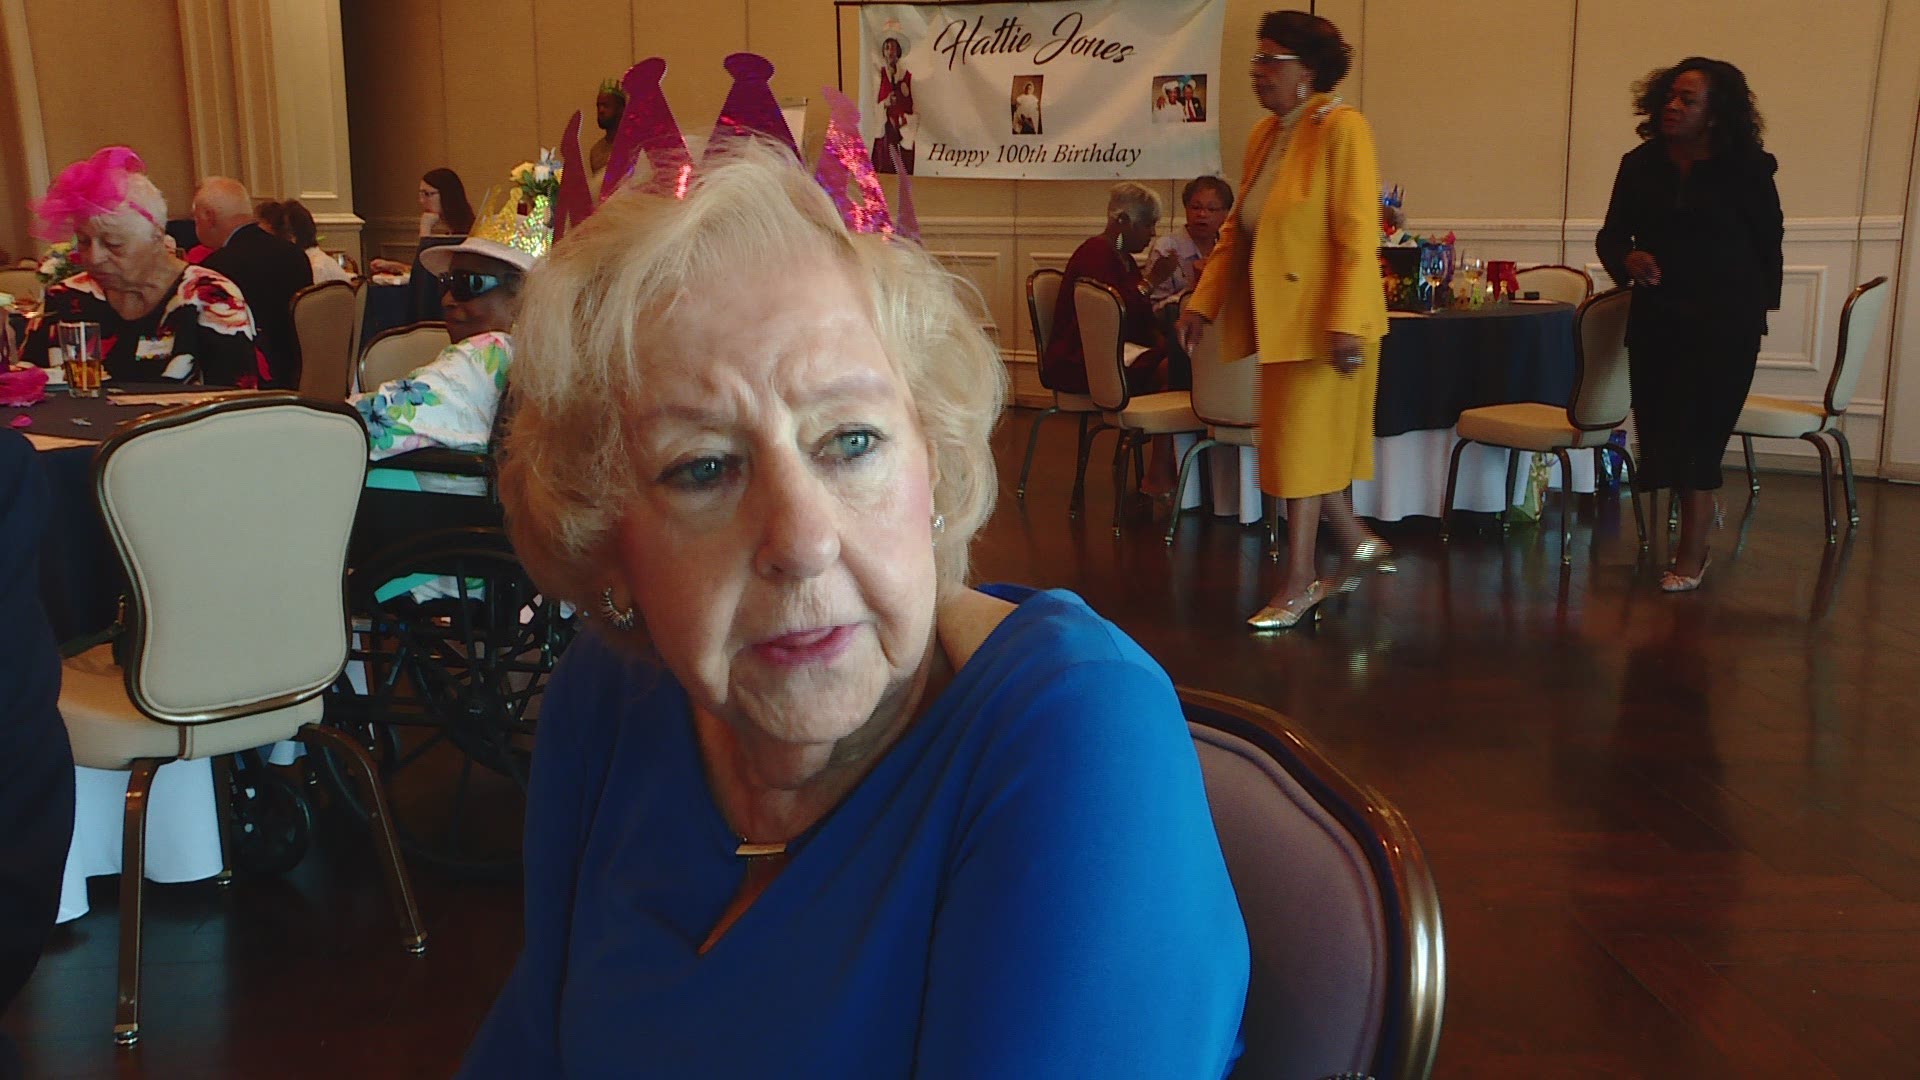 Hattie Jones spent her hundredth birthday at the same place she has spent the last 40 years, at the Army Navy Country Club in Arlington.